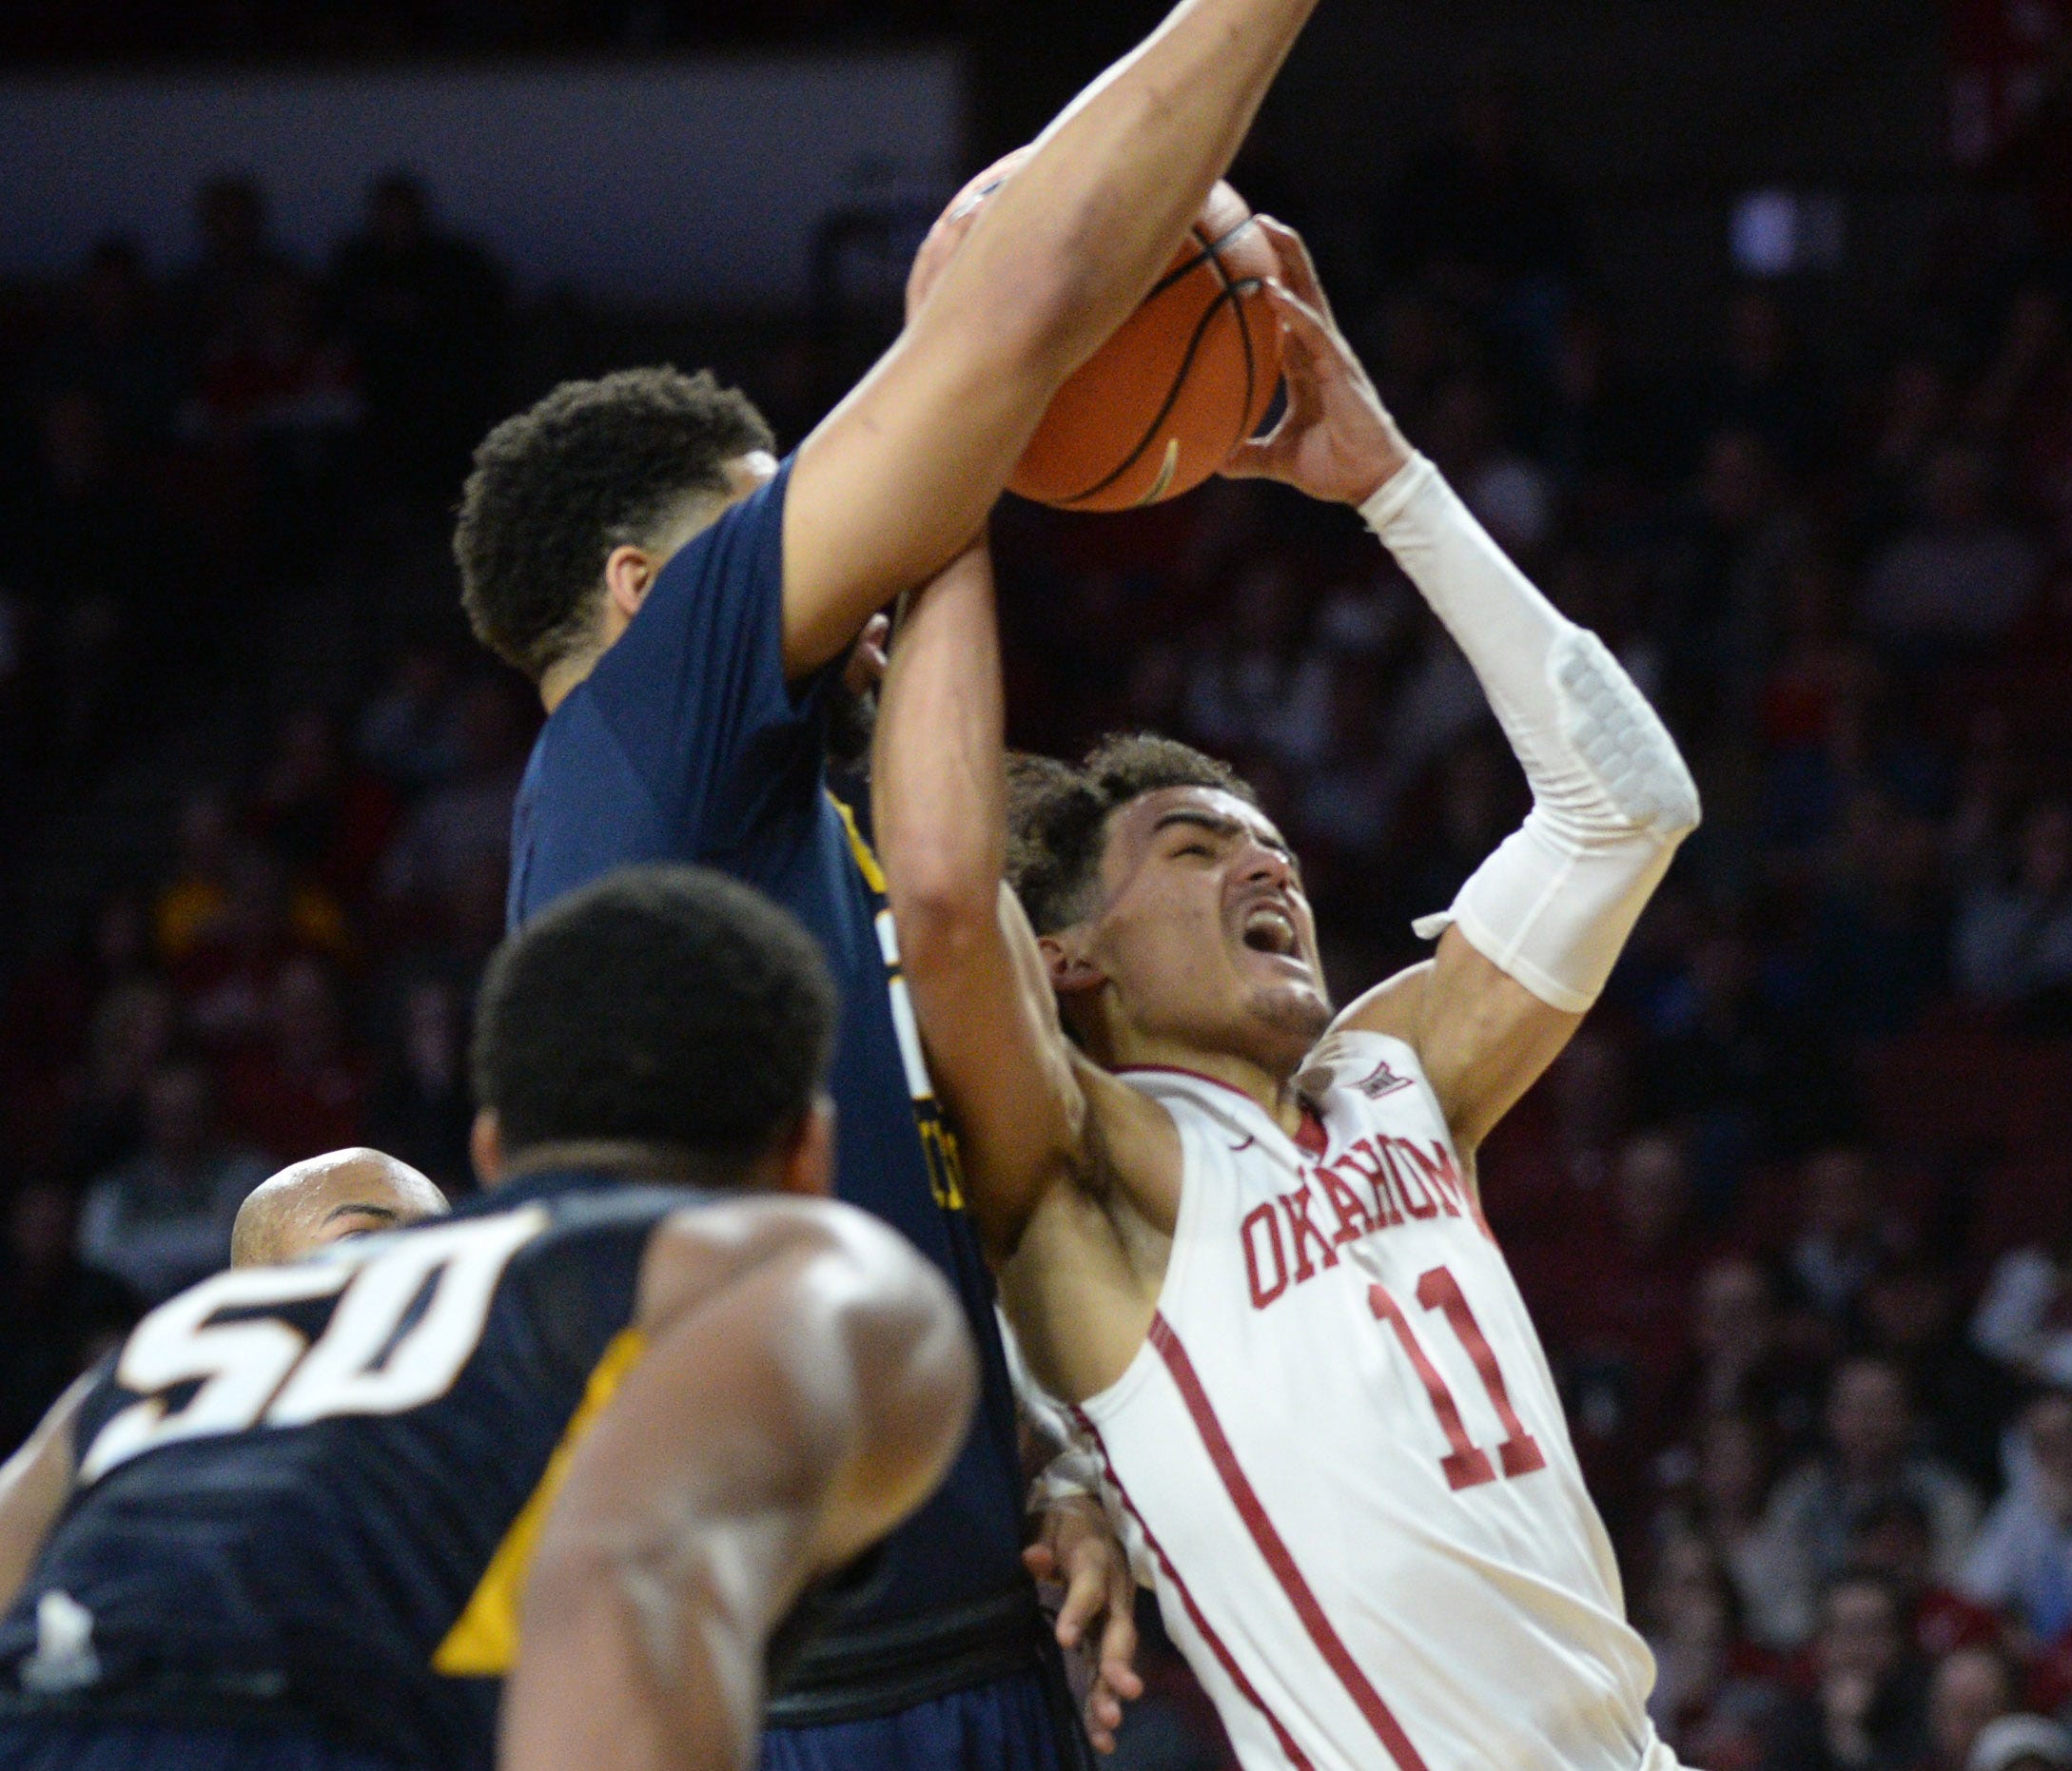 Oklahoma Sooners guard Trae Young (11) is fouled on a shot attempt by West Virginia Mountaineers forward Esa Ahmad (23) during the second half at Lloyd Noble Center.